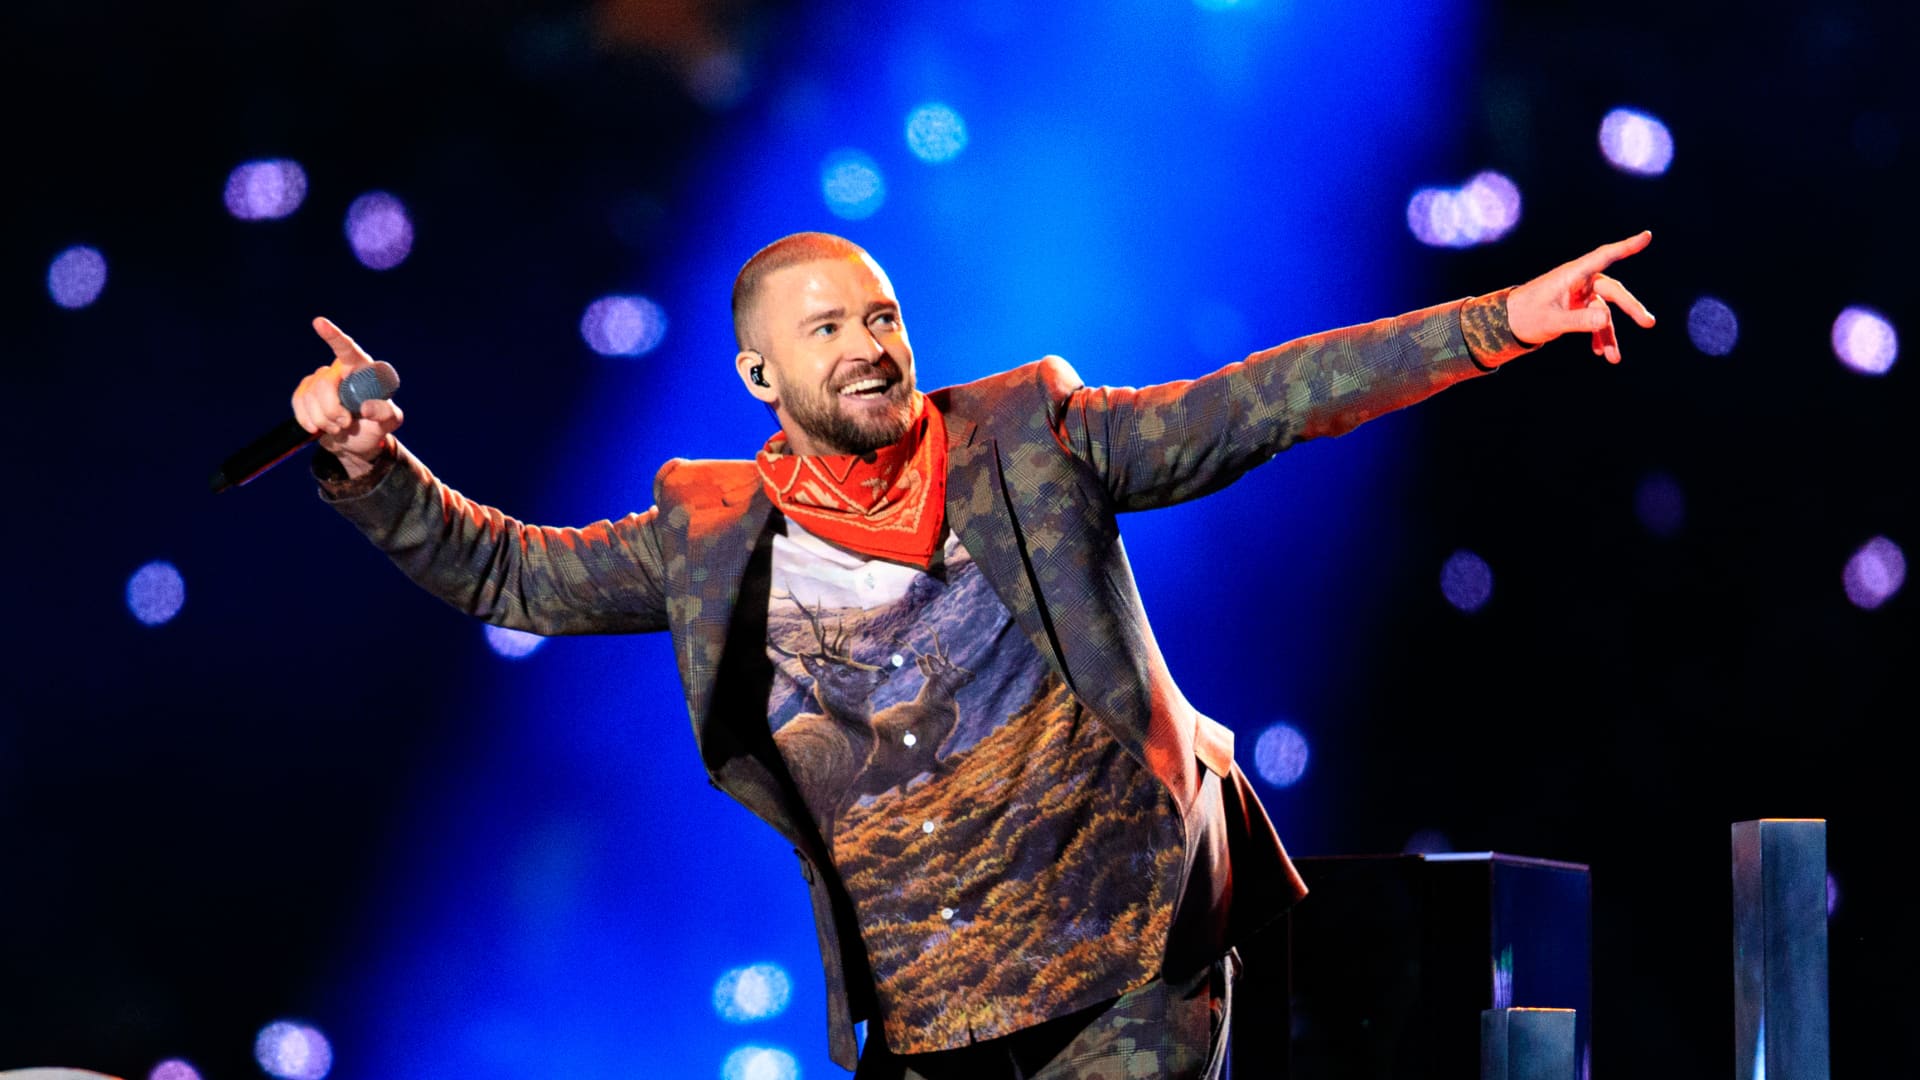 Justin Timberlake sells song catalog to fund backed by Blackstone in deal valued at 0 million